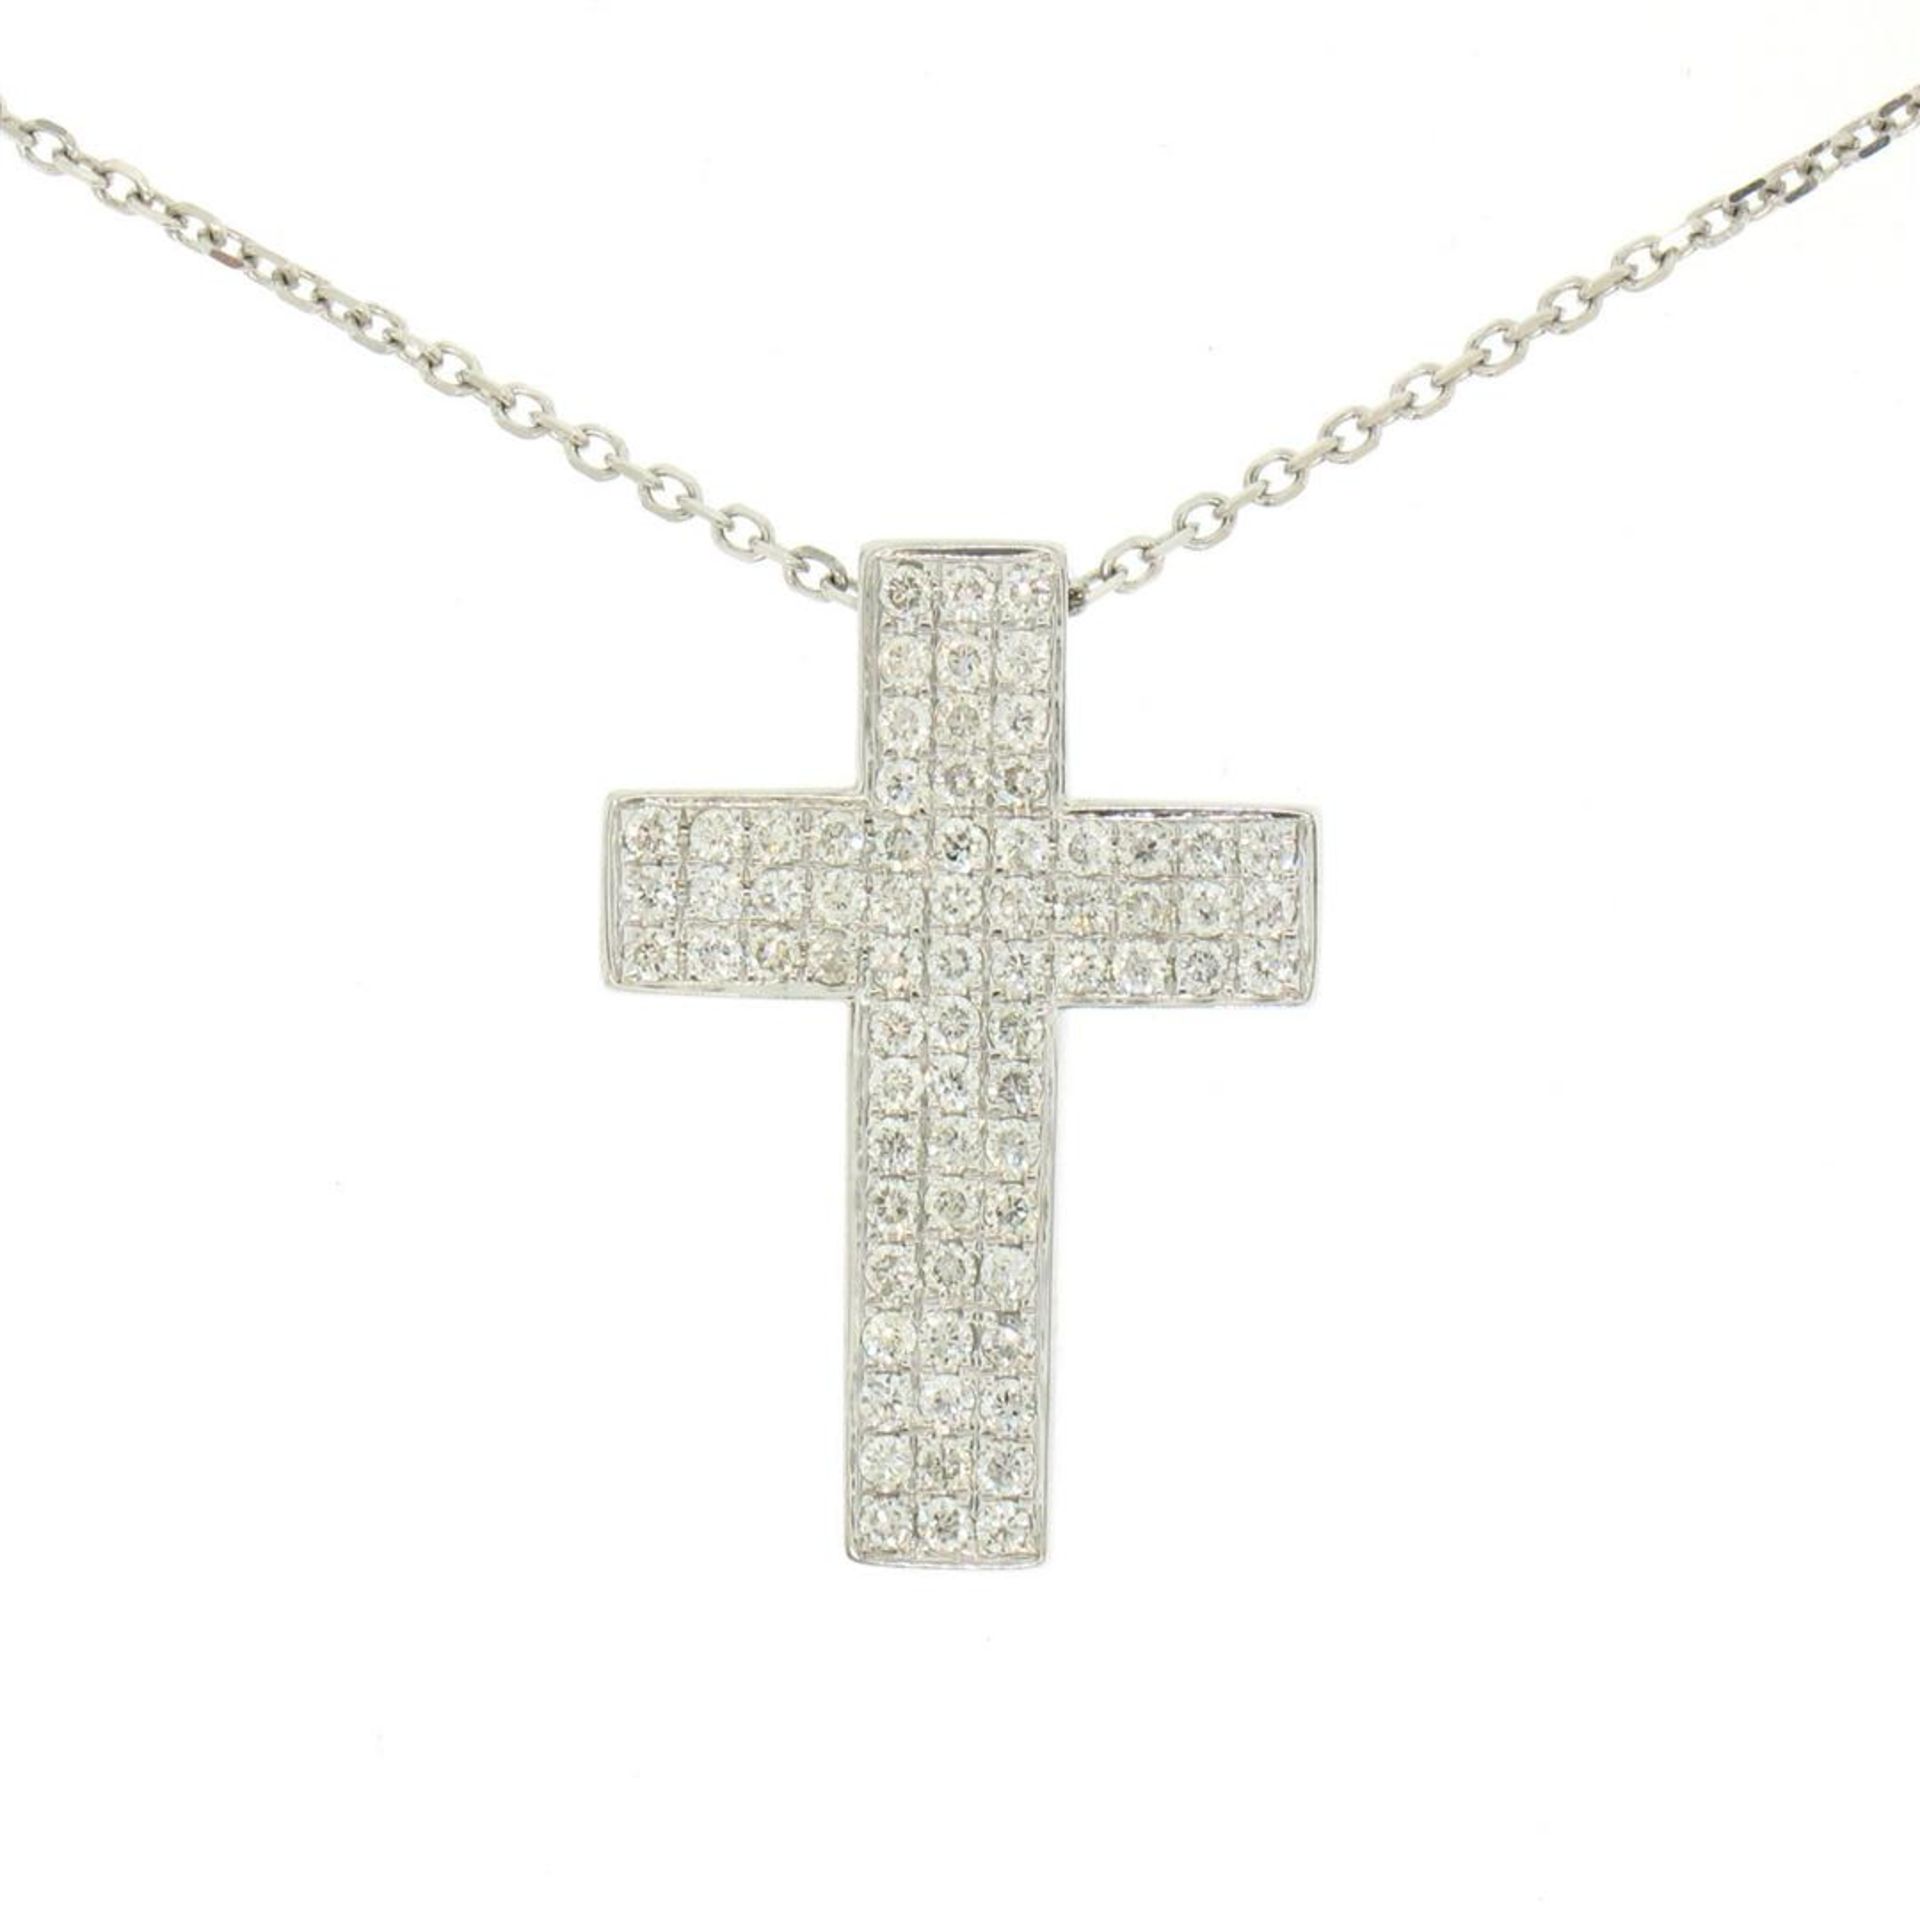 14K White Gold 0.51 ctw Micro Pave Diamond Cross Pendant w/ 18" Cable Link Chain